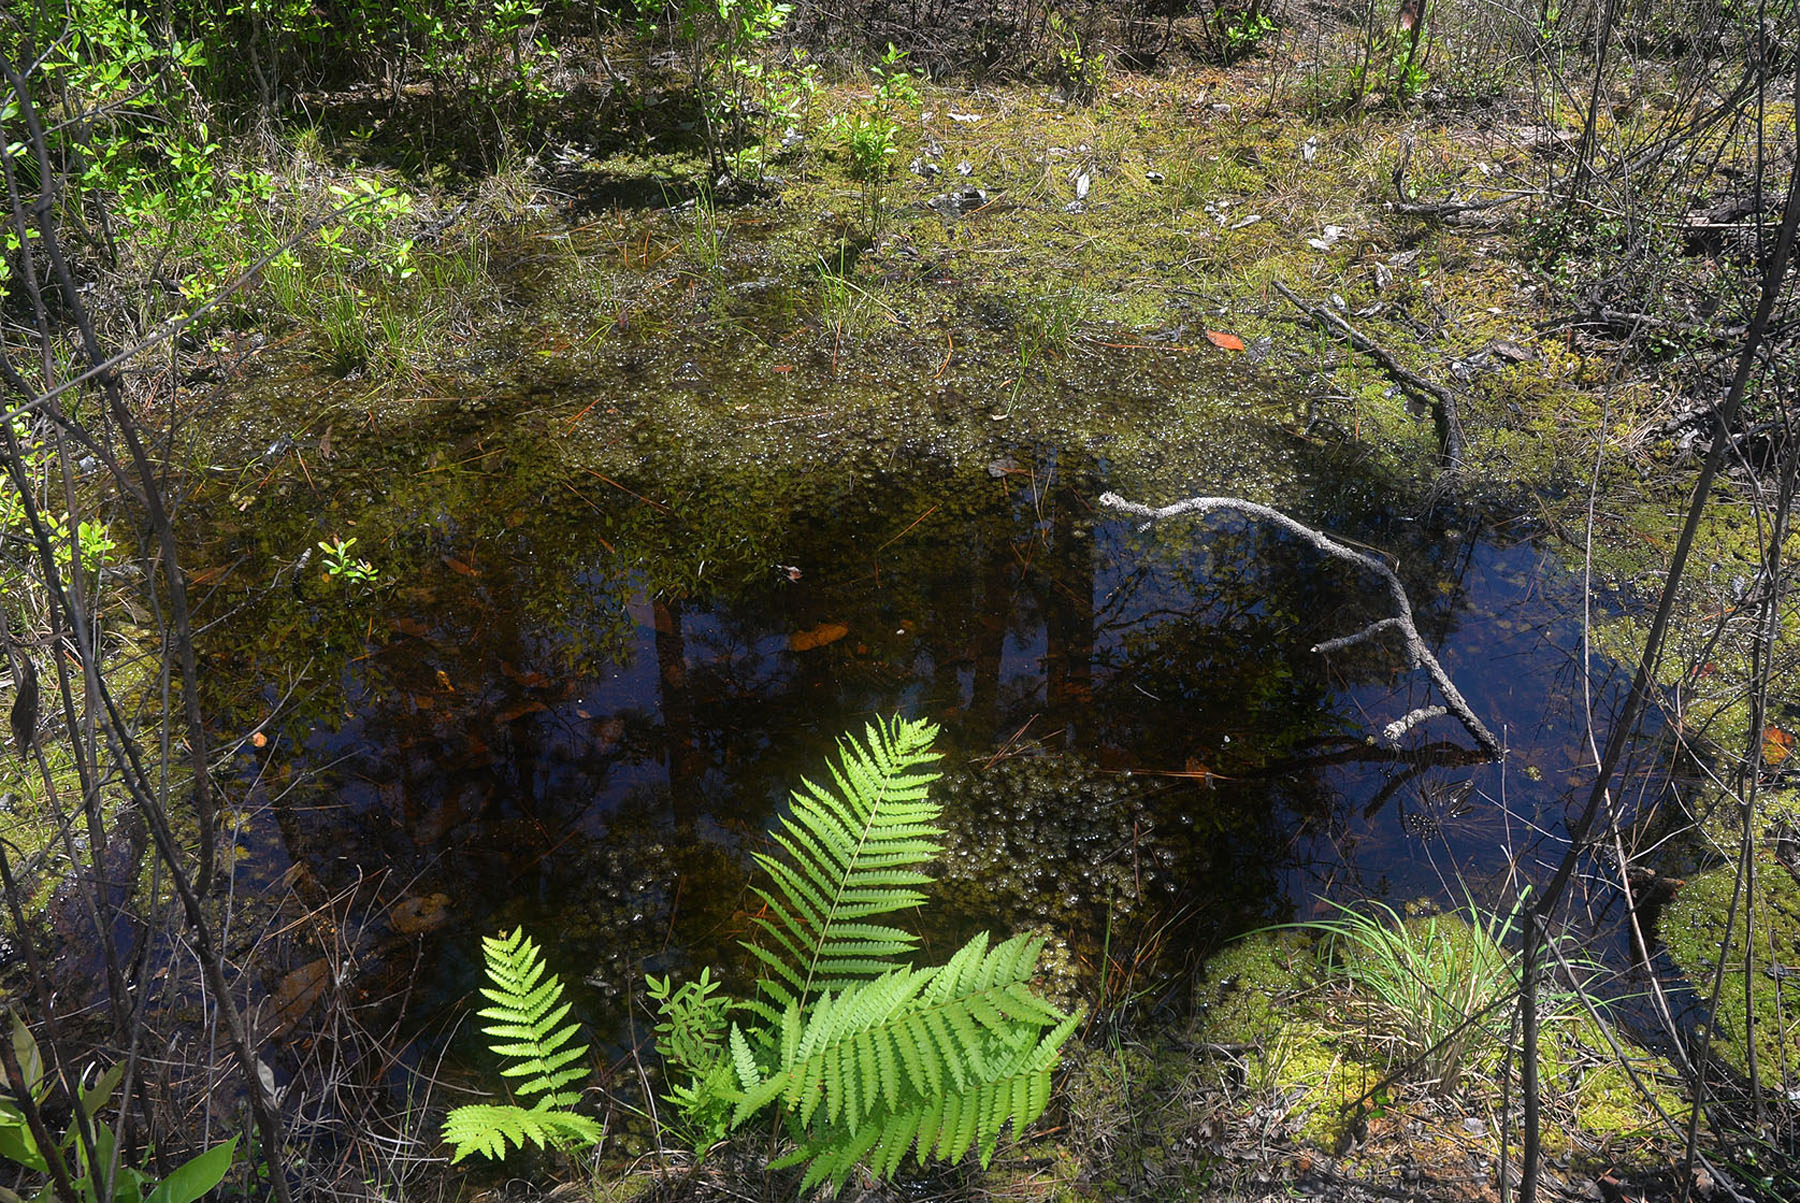 A stagnant pool of water with algae and moss surrounded by a fern and small trees